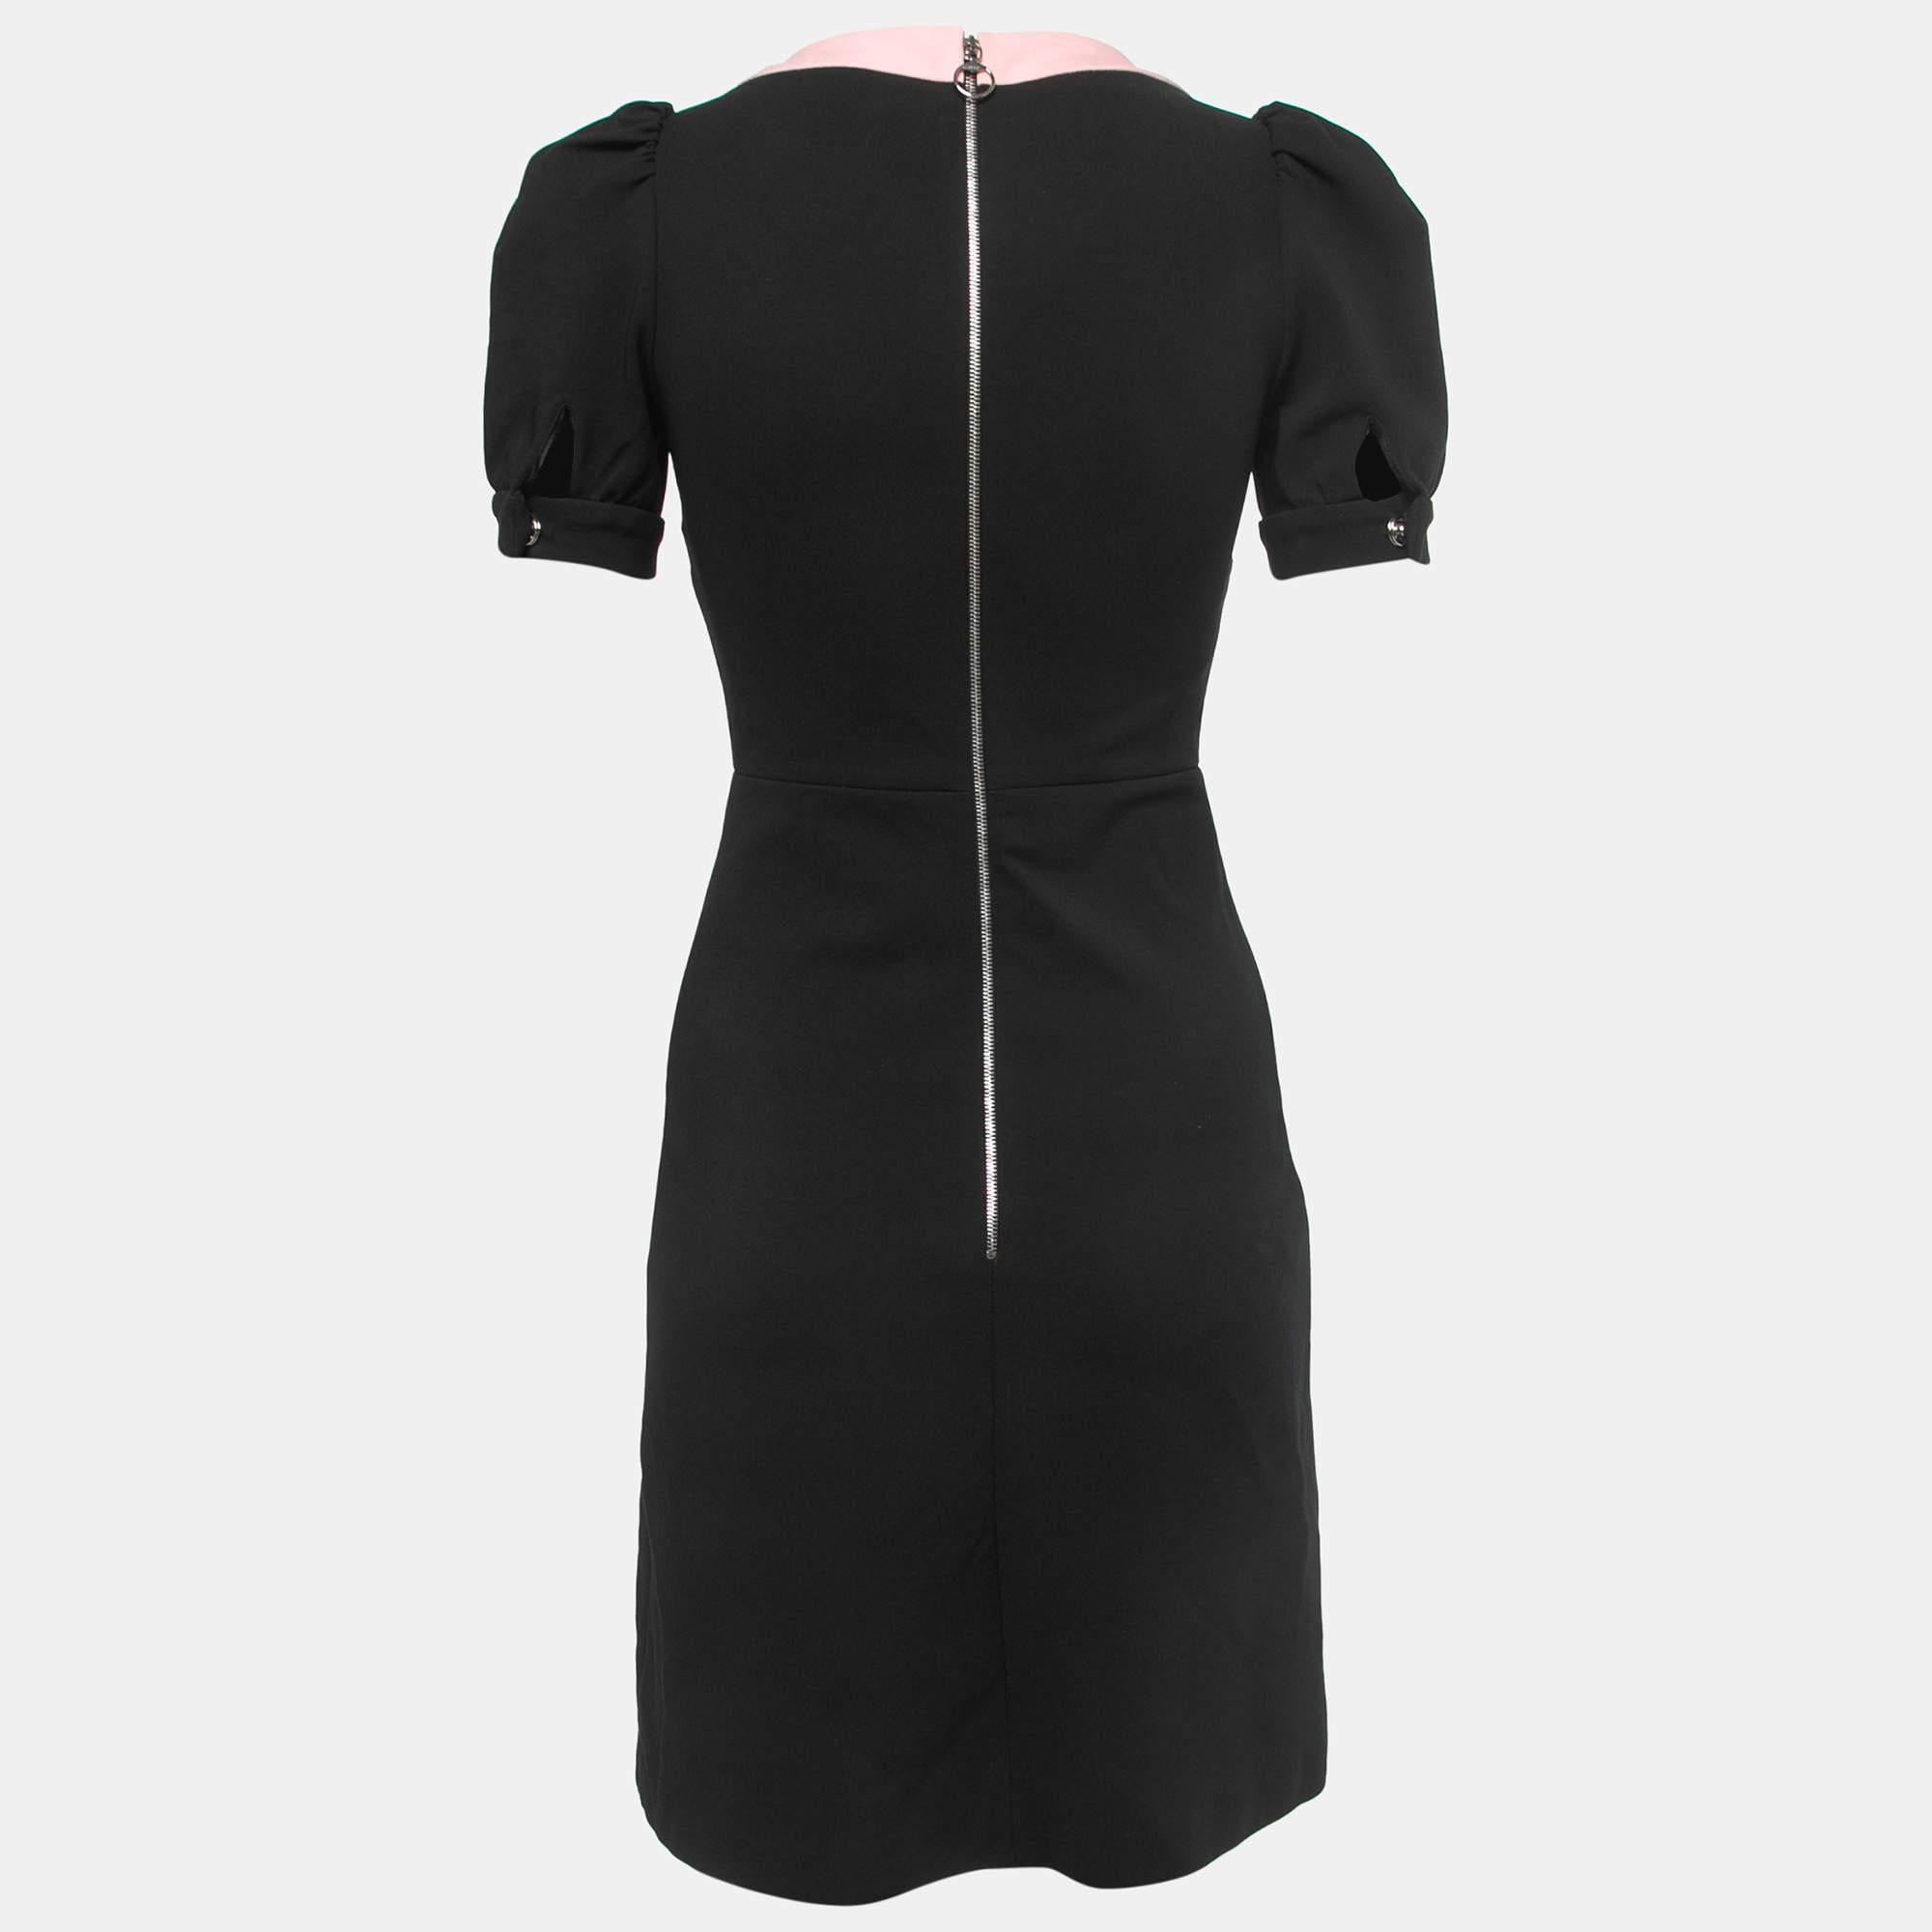 Make a luxe fashion statement by wearing this designer dress. It is tailored using fine fabric into a flattering silhouette.

